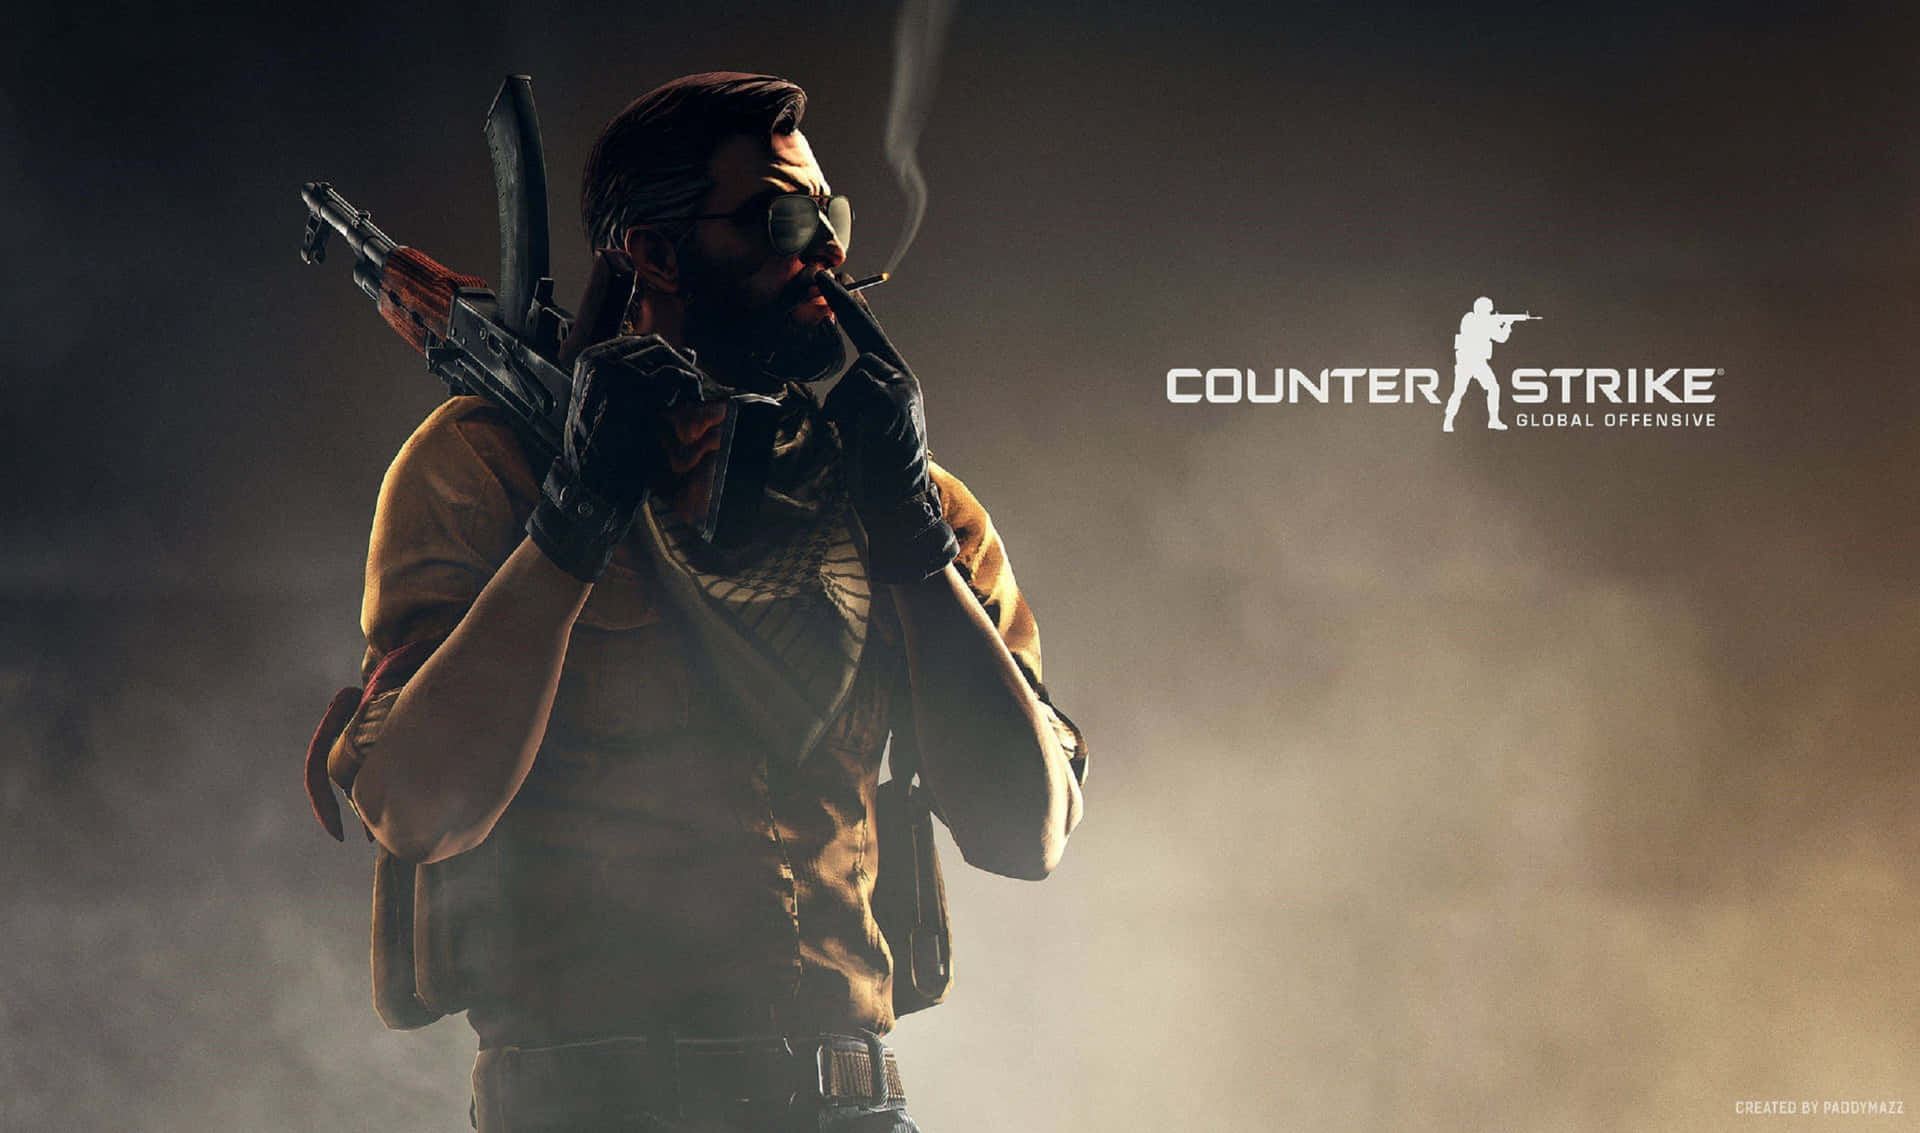 Customize Your Counter-Strike: Global Offensive Experience